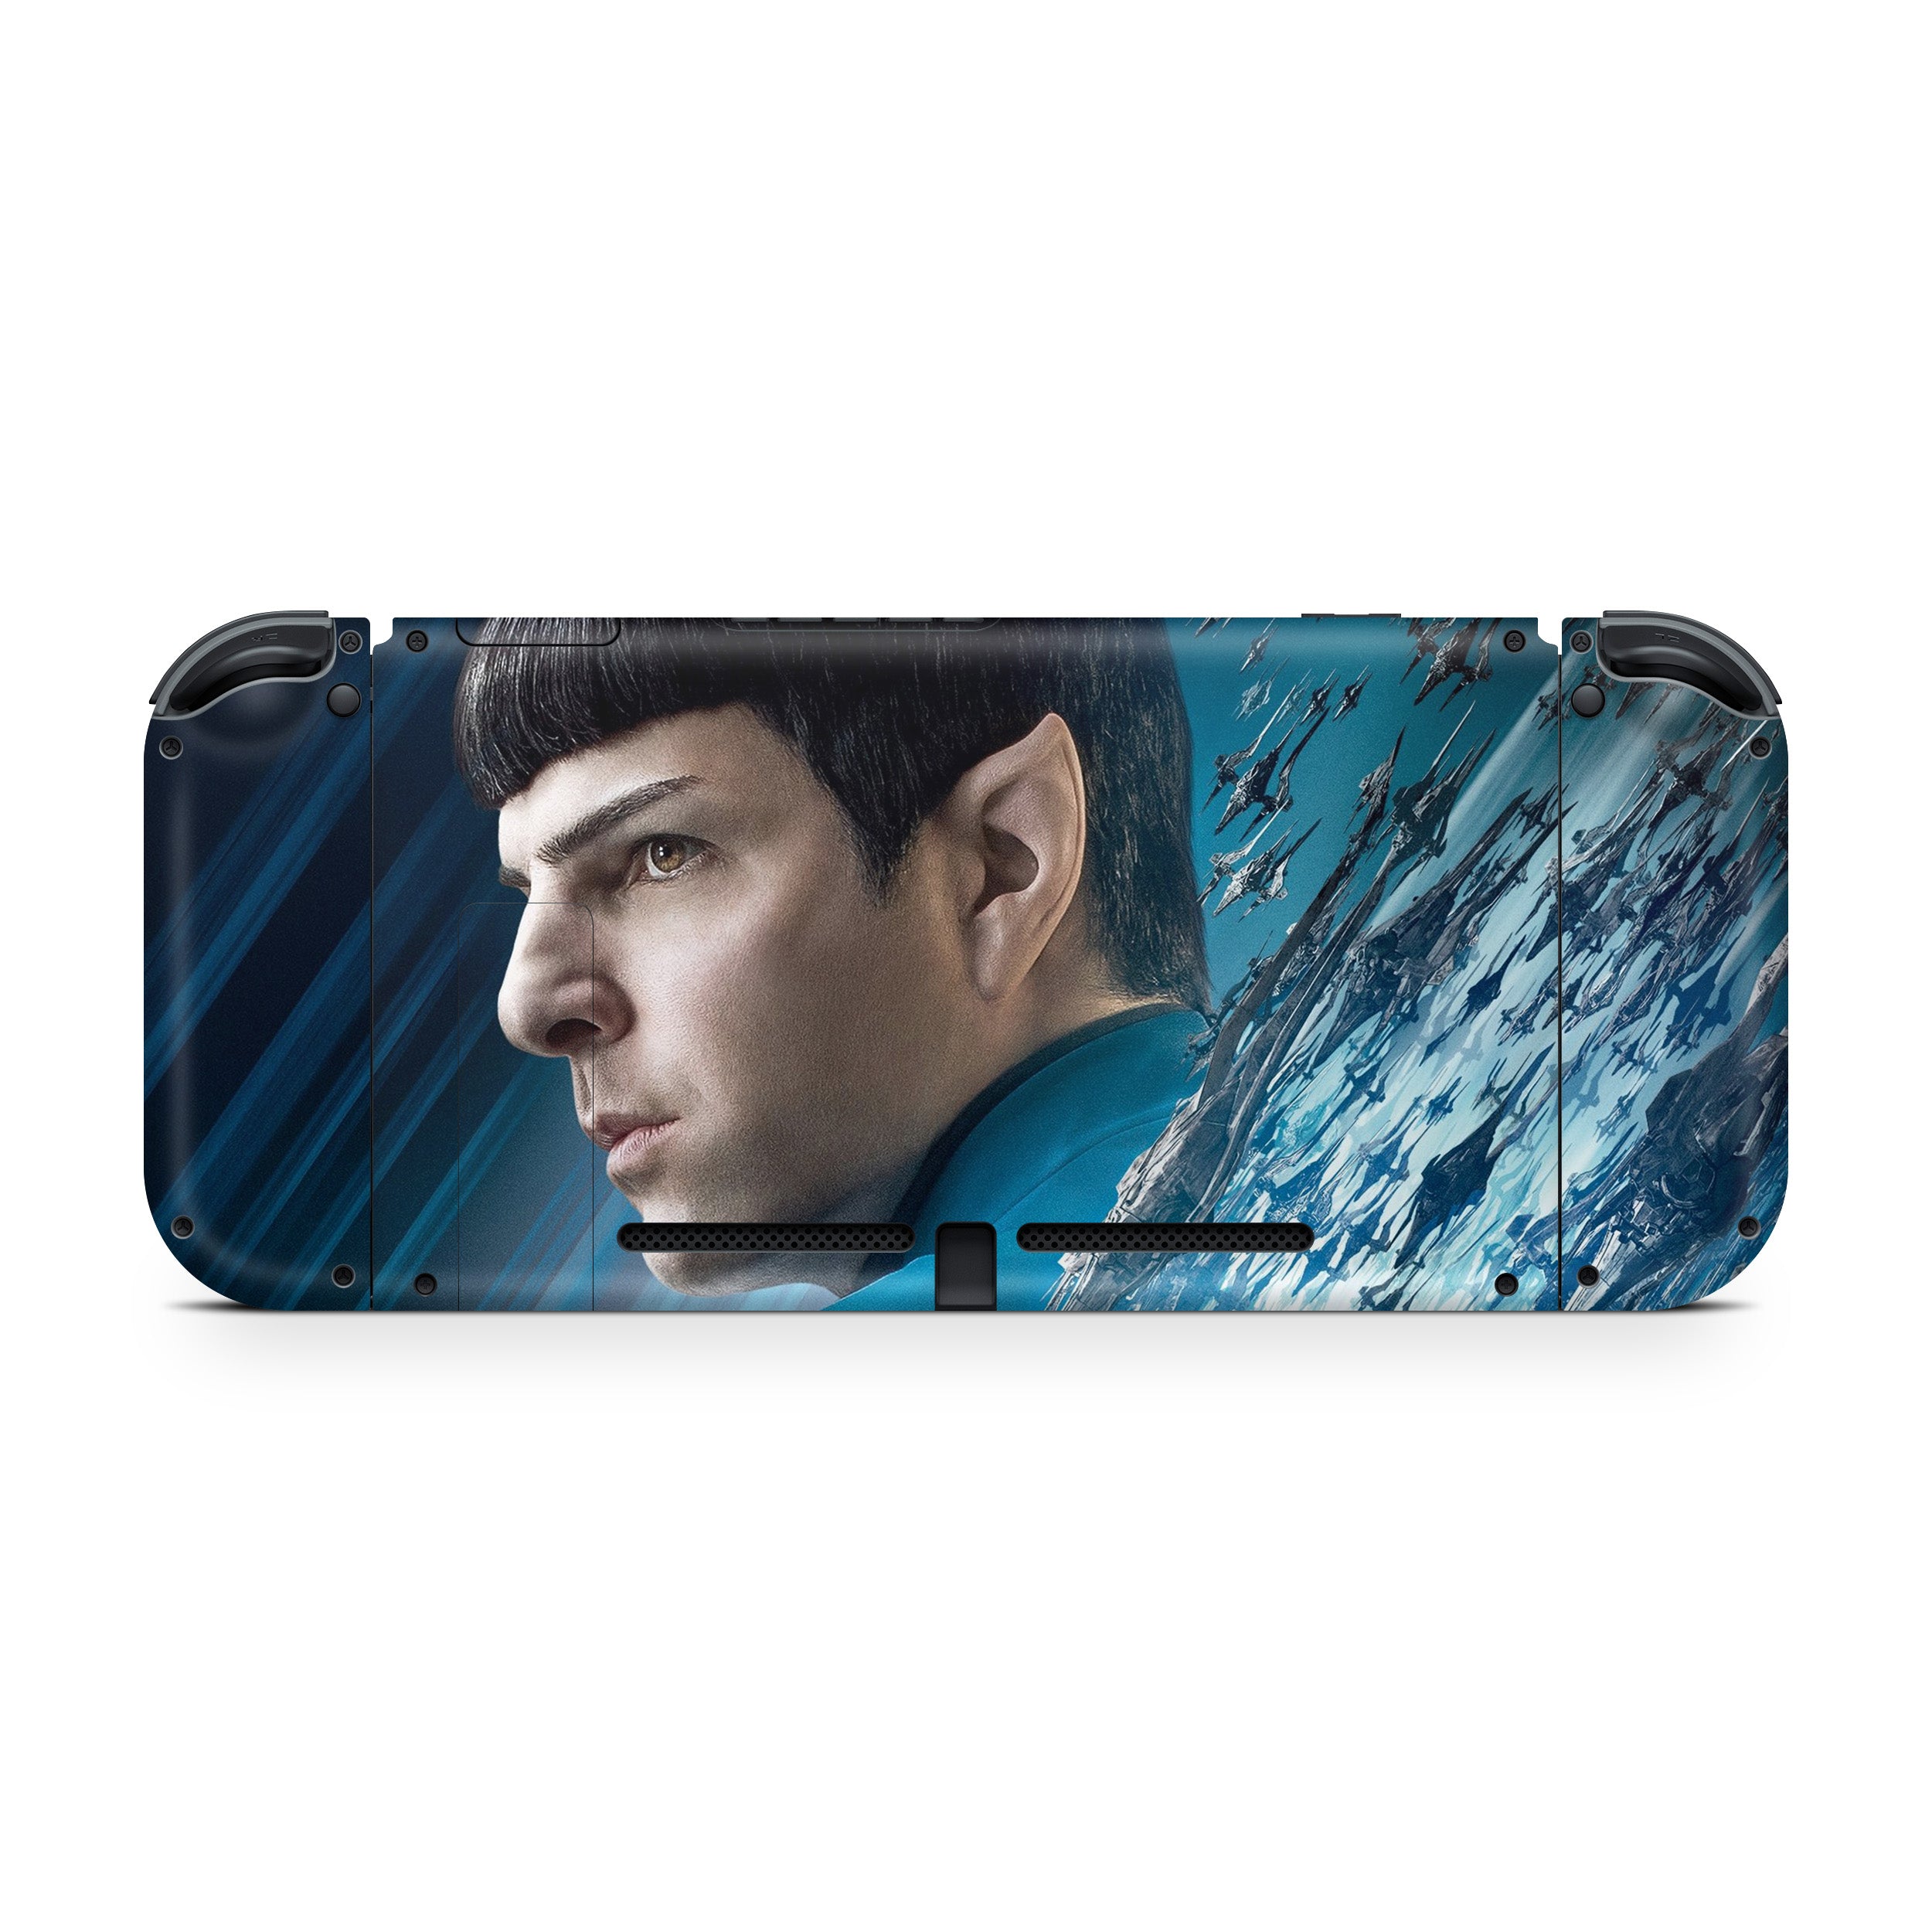 A video game skin featuring a Star Trek Beyond design for the Nintendo Switch.